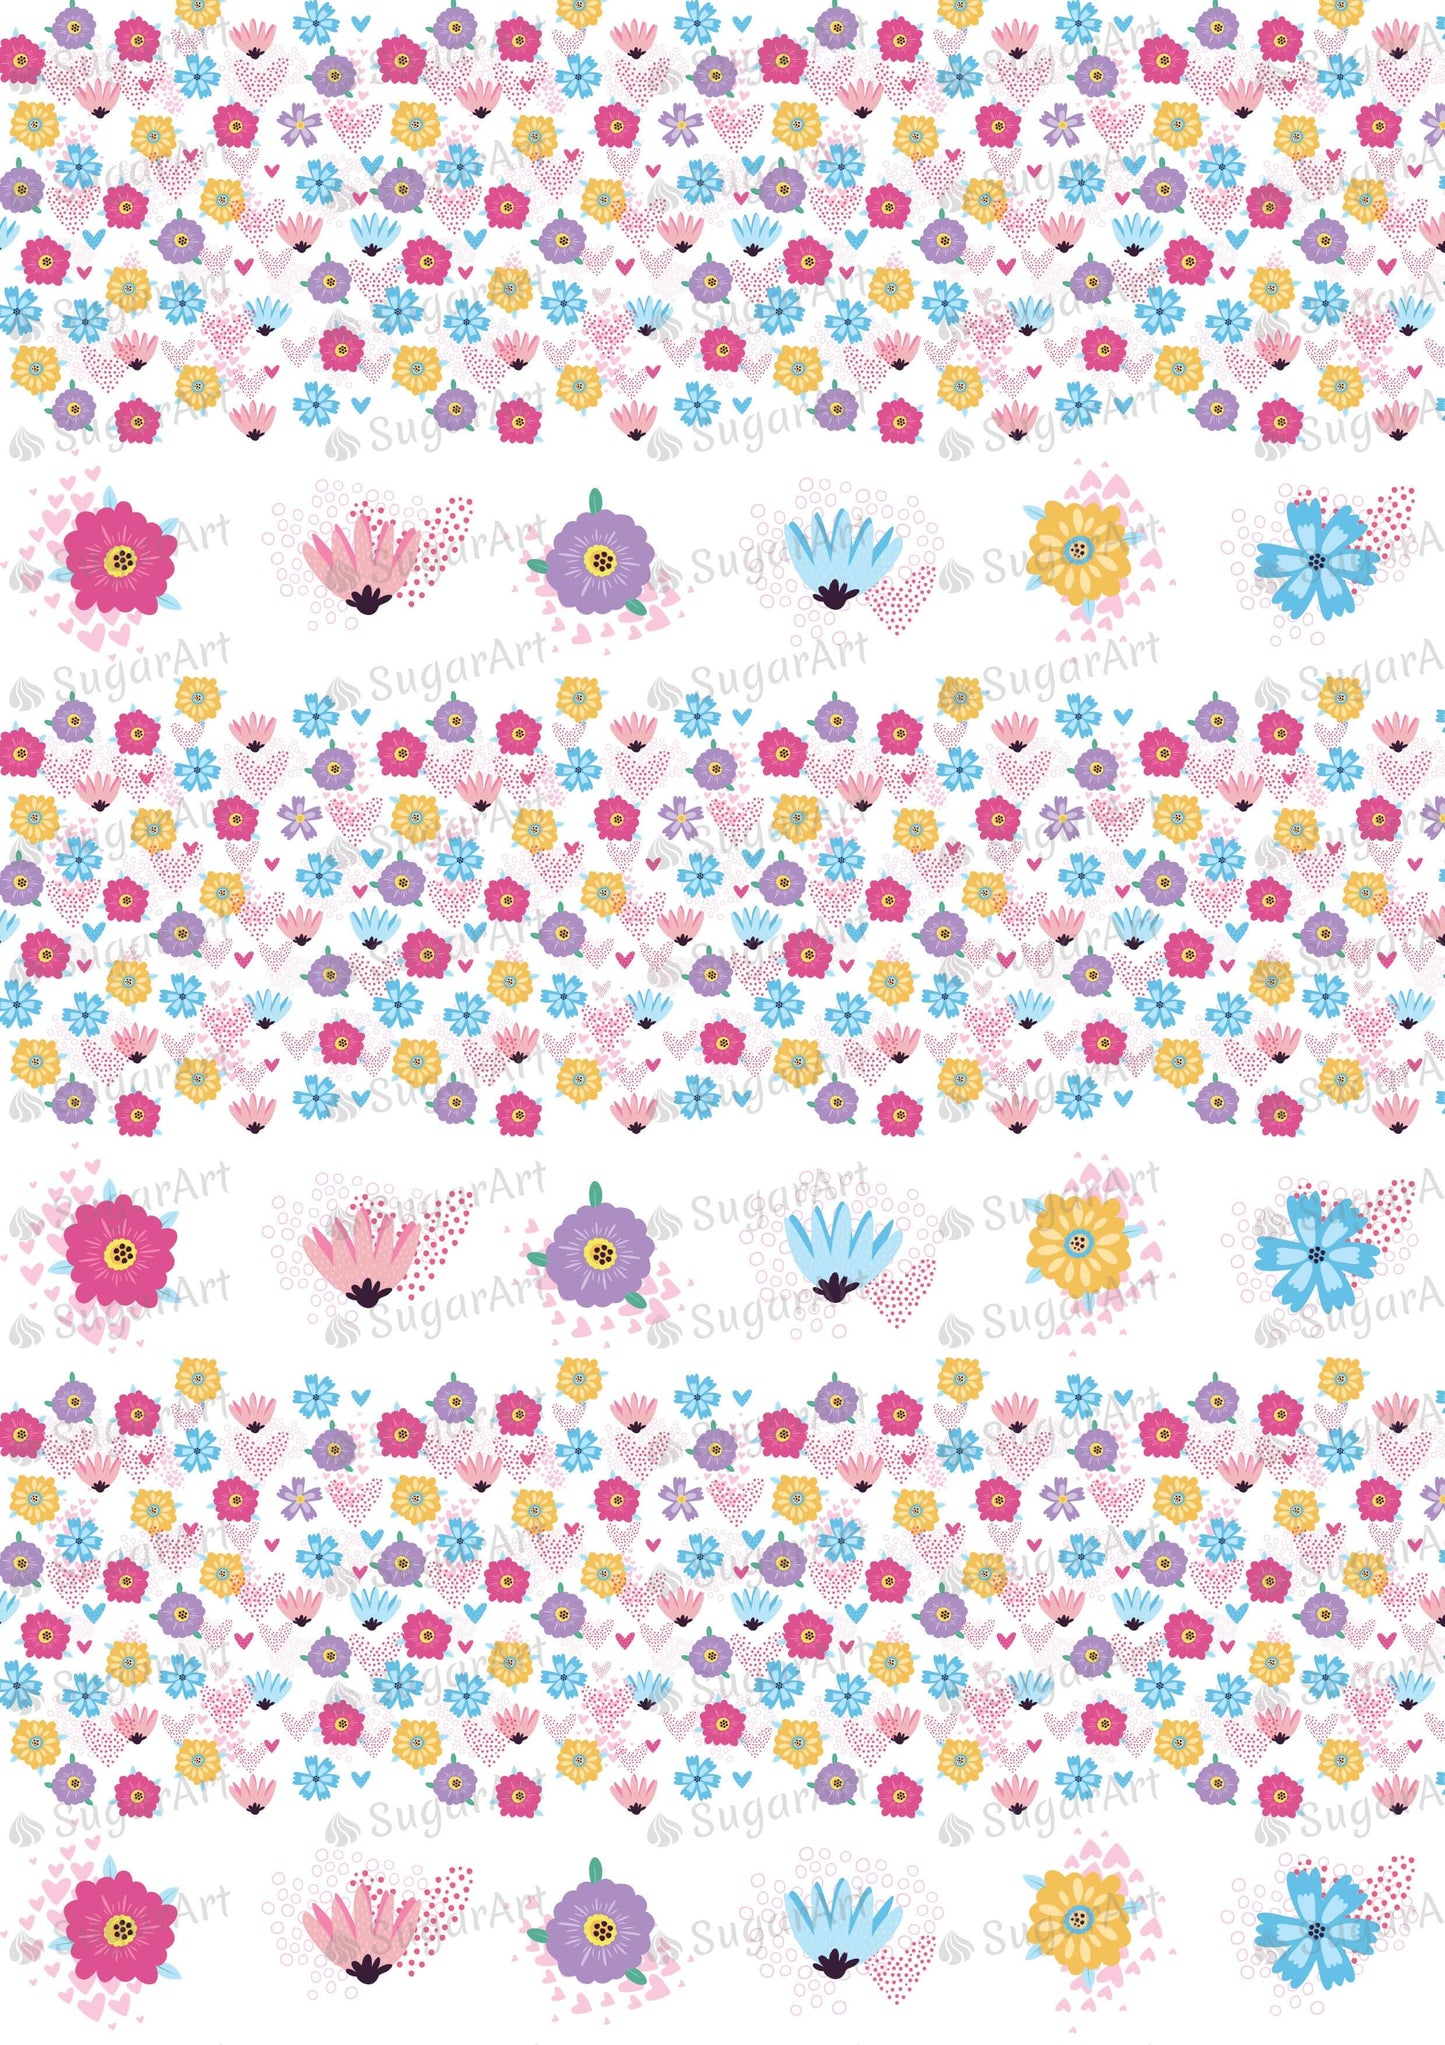 Pattern with Flowers and Hearts - ESA085.